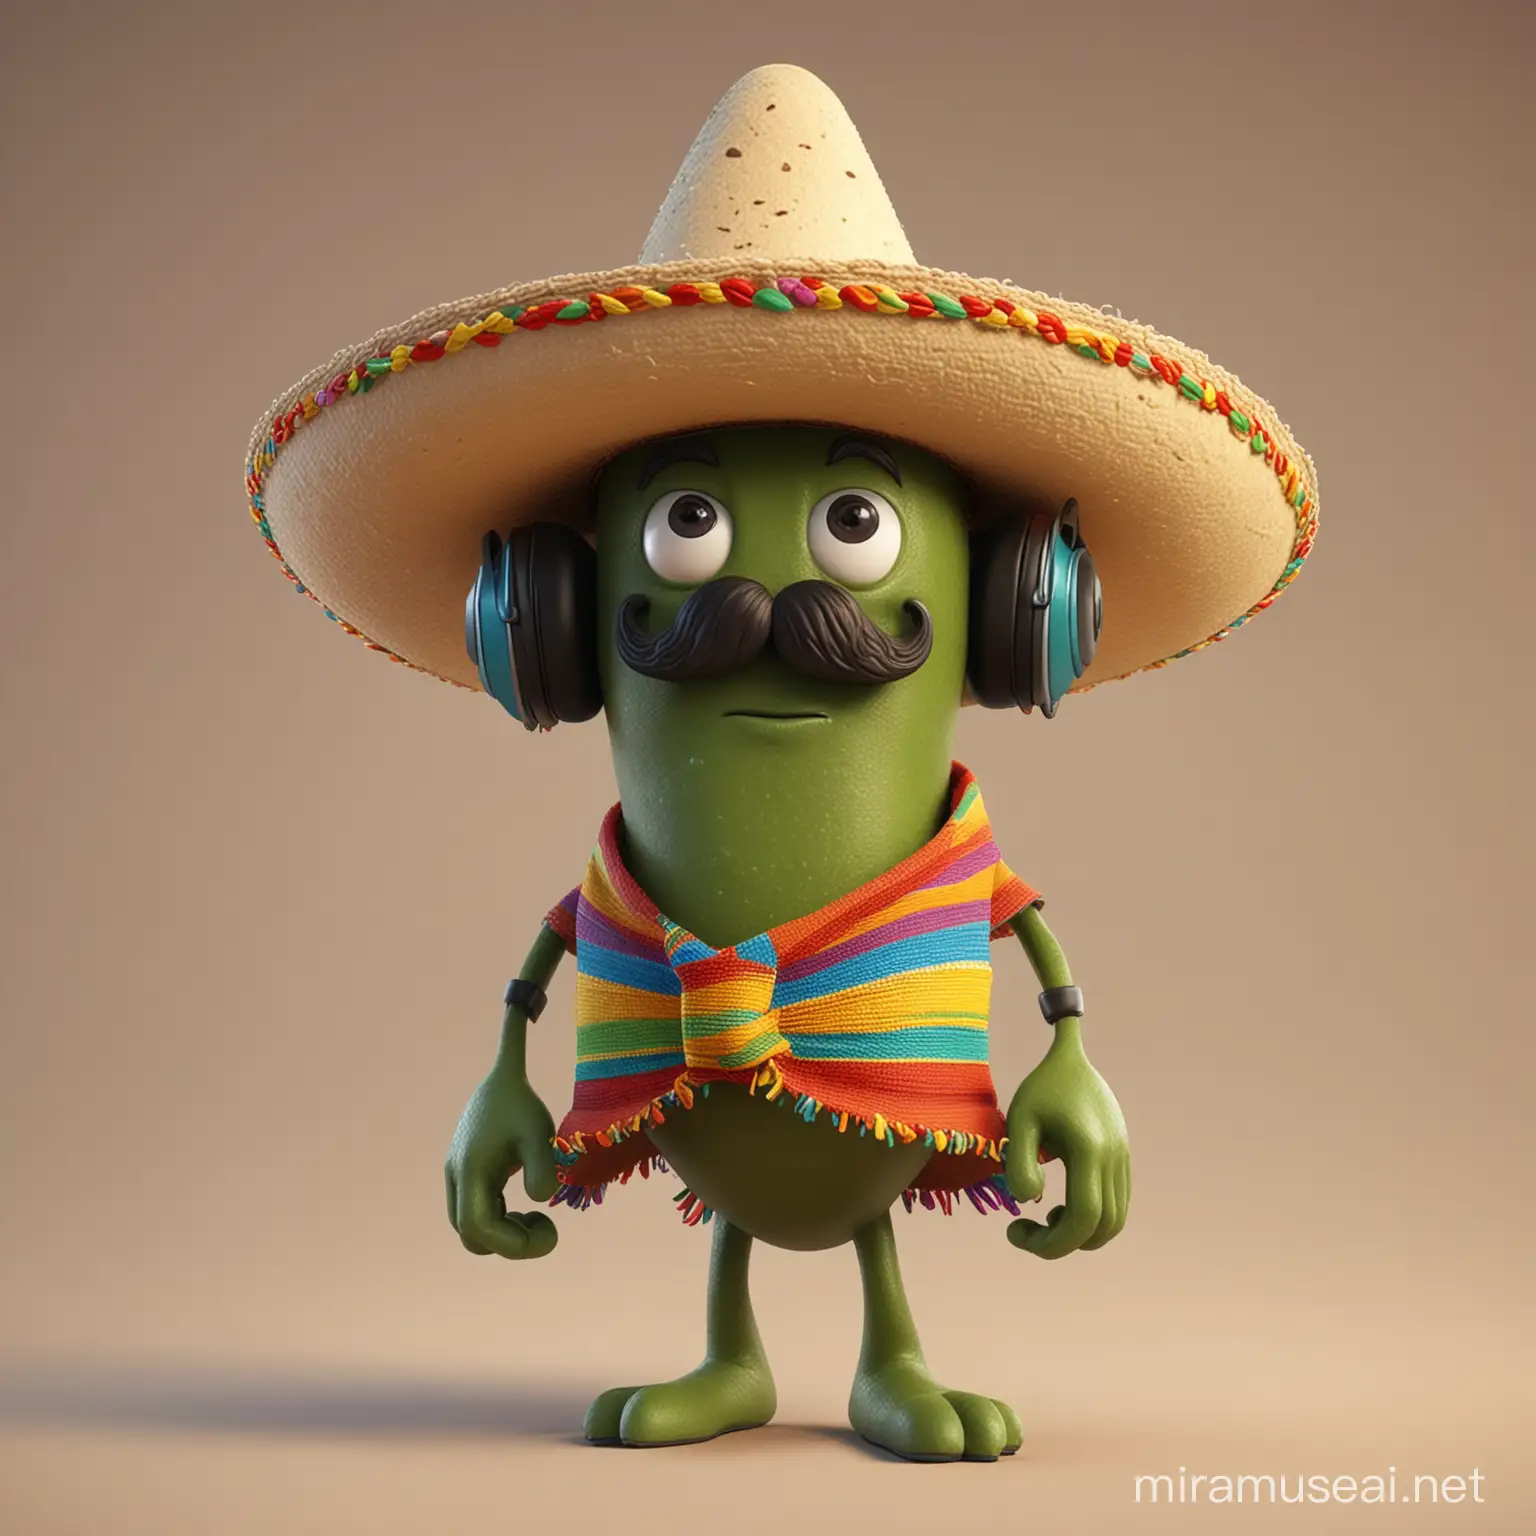 JALAPEÑO Character with a mustache and sombrero 
wearing headphones and a zarape
pixar style high quality 4k

